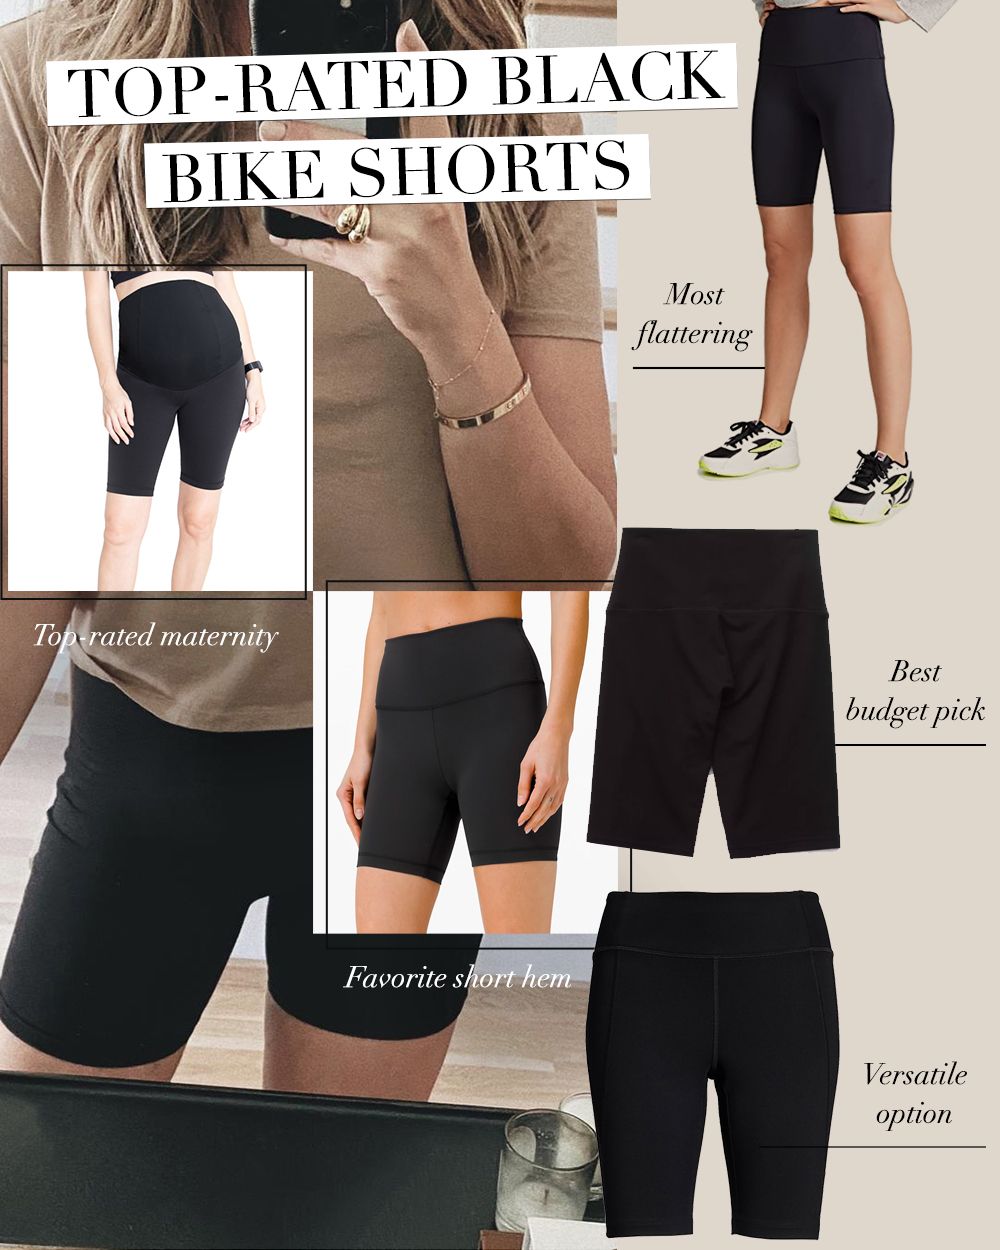 Top-Rated Black Bike Shorts  The Teacher Diva: a Dallas Fashion Blog  featuring Beauty & Lifestyle